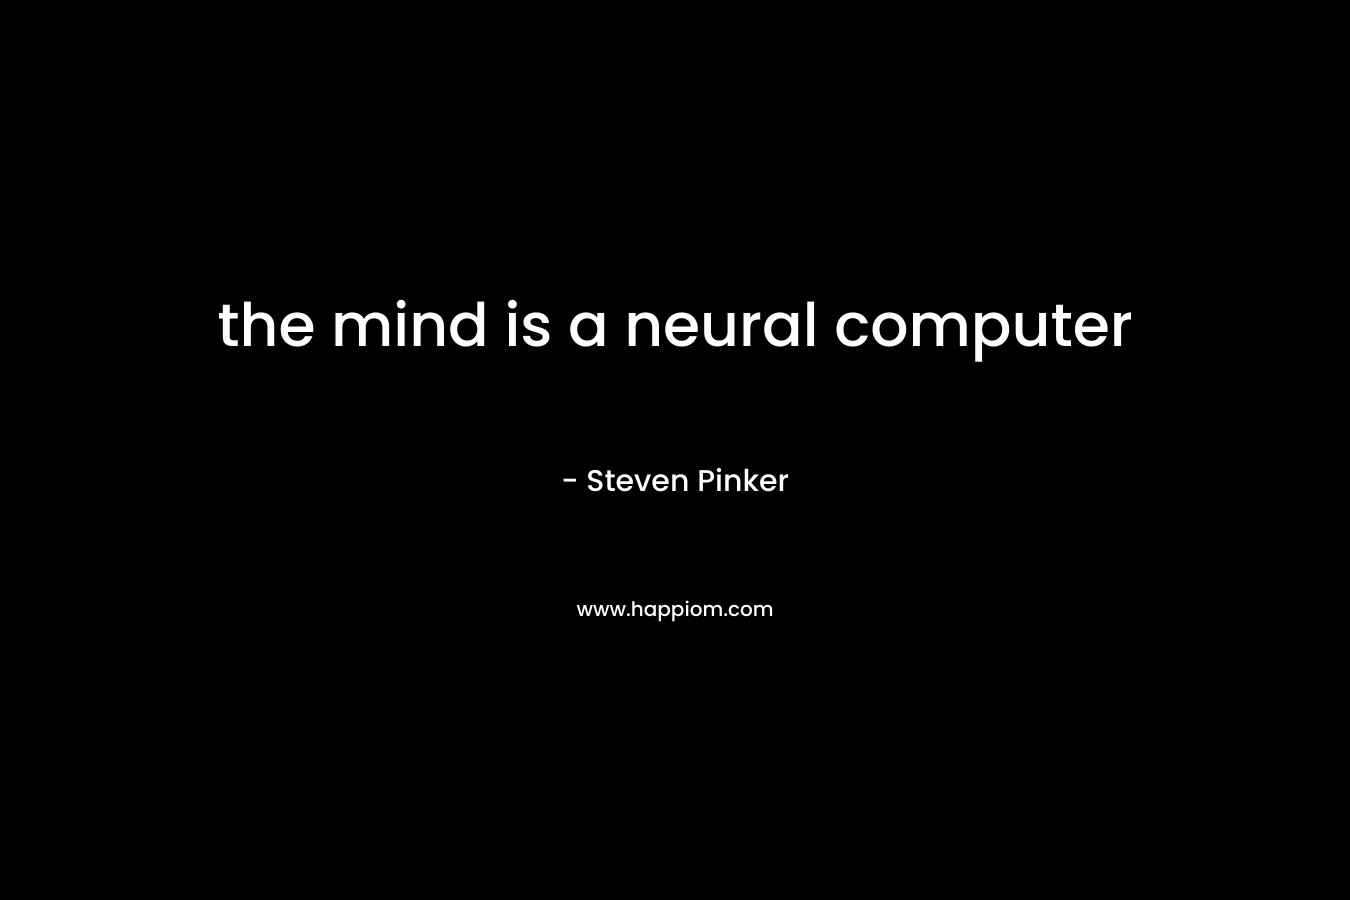 the mind is a neural computer